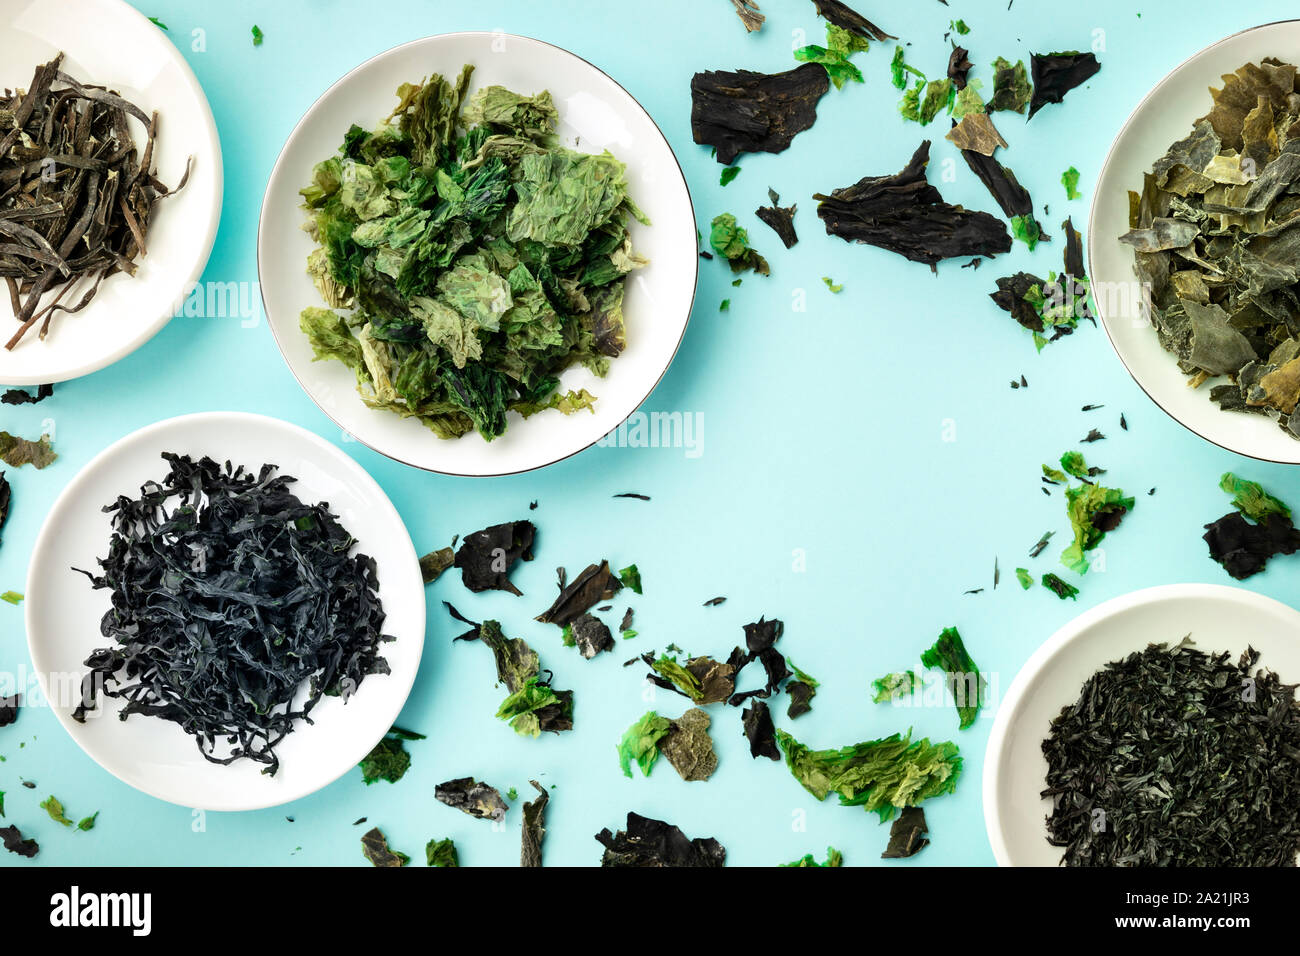 Various dry seaweed, sea vegetables, shot from the top on a teal background forming a frame for copy space Stock Photo